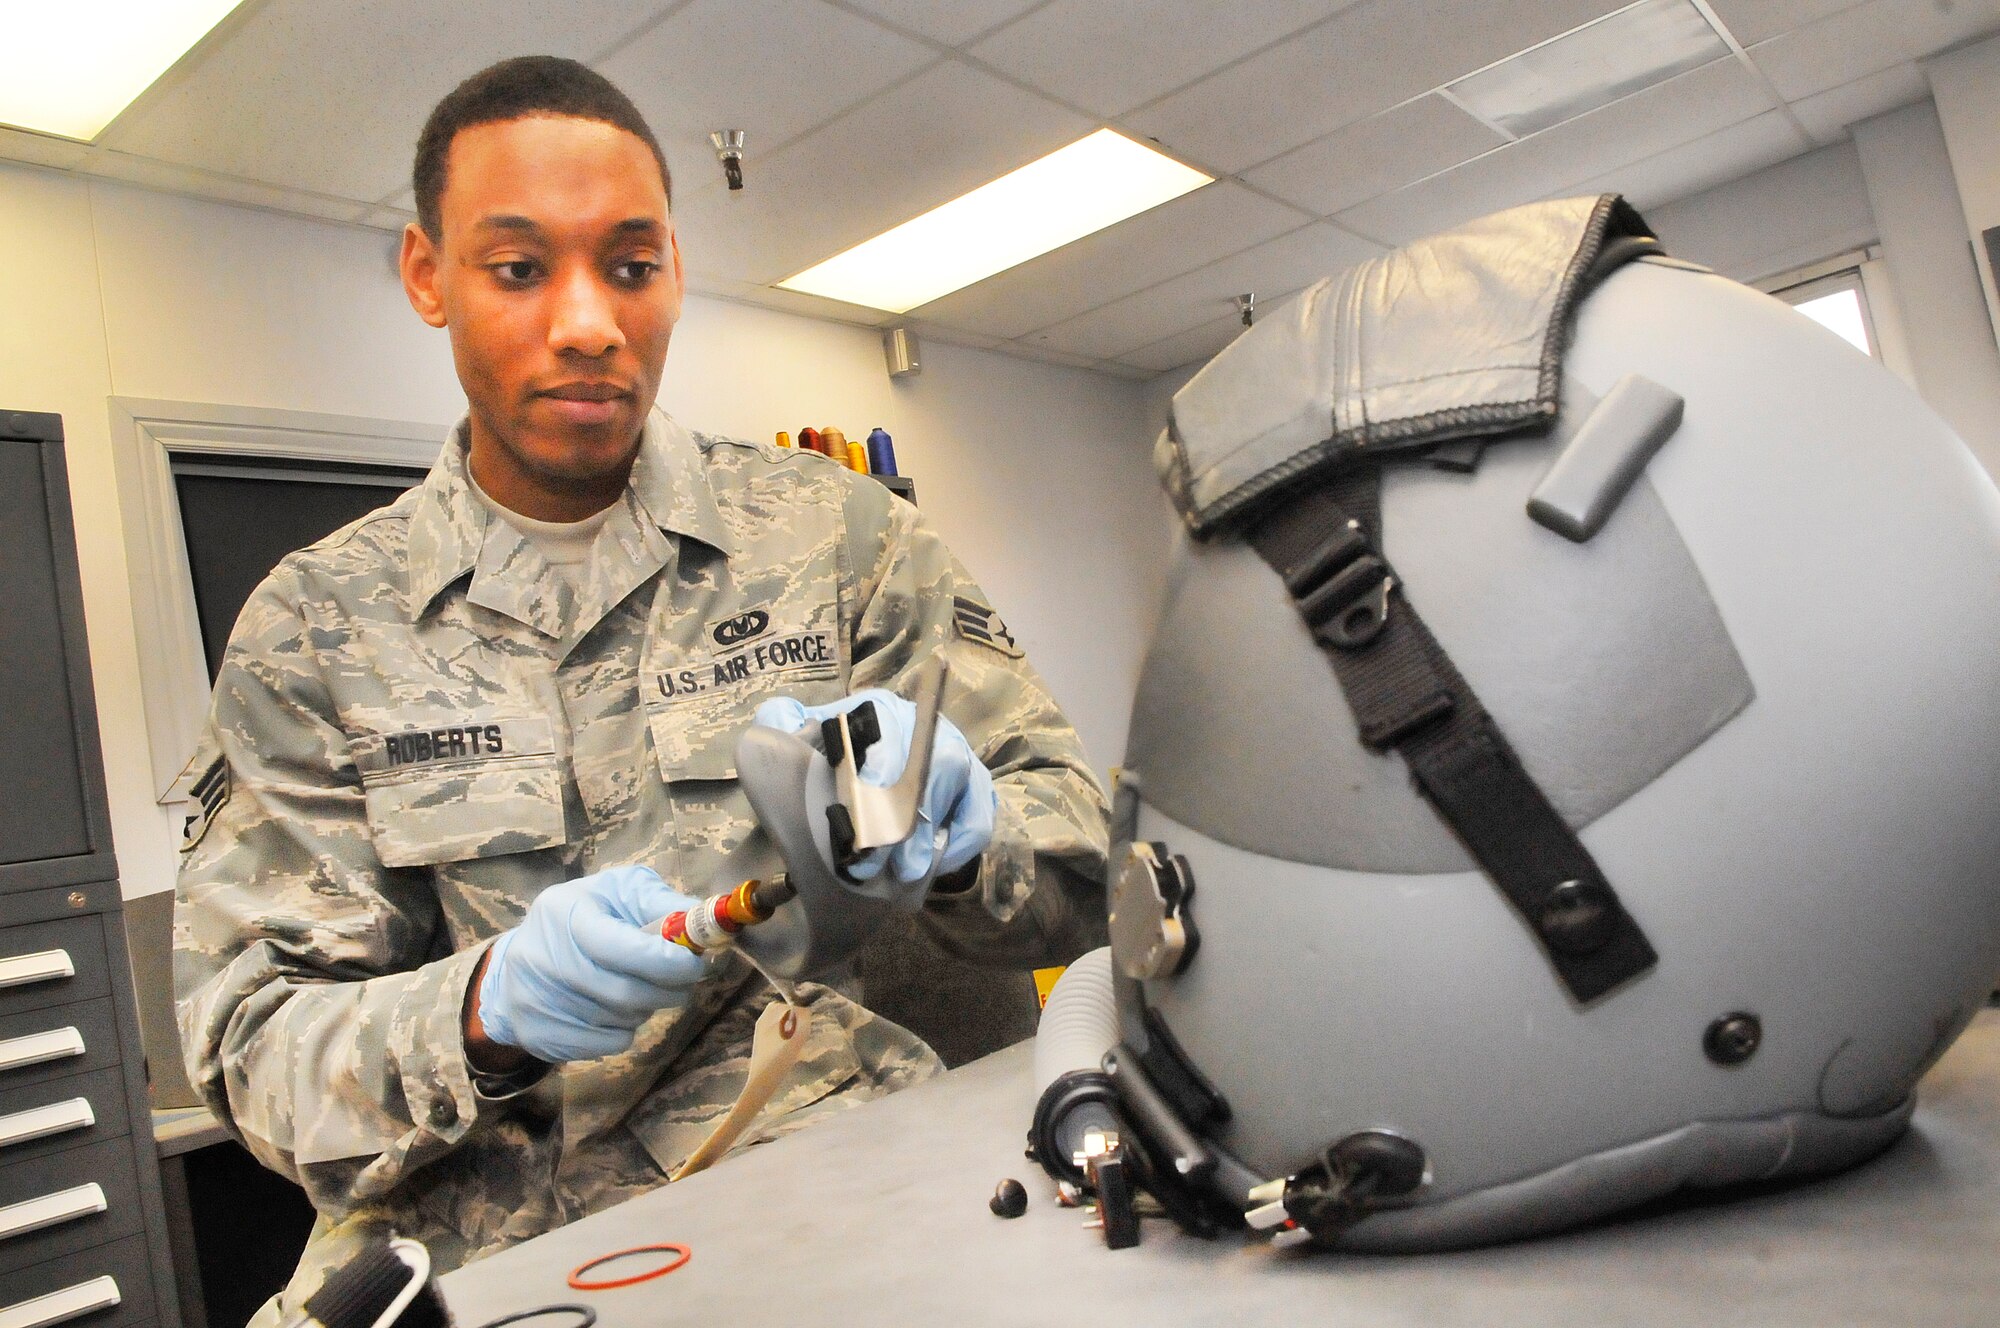 Senior Airman Stephen Roberts, aircrew flight equipment technician, tears down, cleans, reassembles and tests oxygen masks and flight helmets in the life support shop for the 339th Flight Test Squadron. This process is done every 30 days to ensure the helmets are in good working condition.  (U. S. Air Force photo/Sue Sapp)